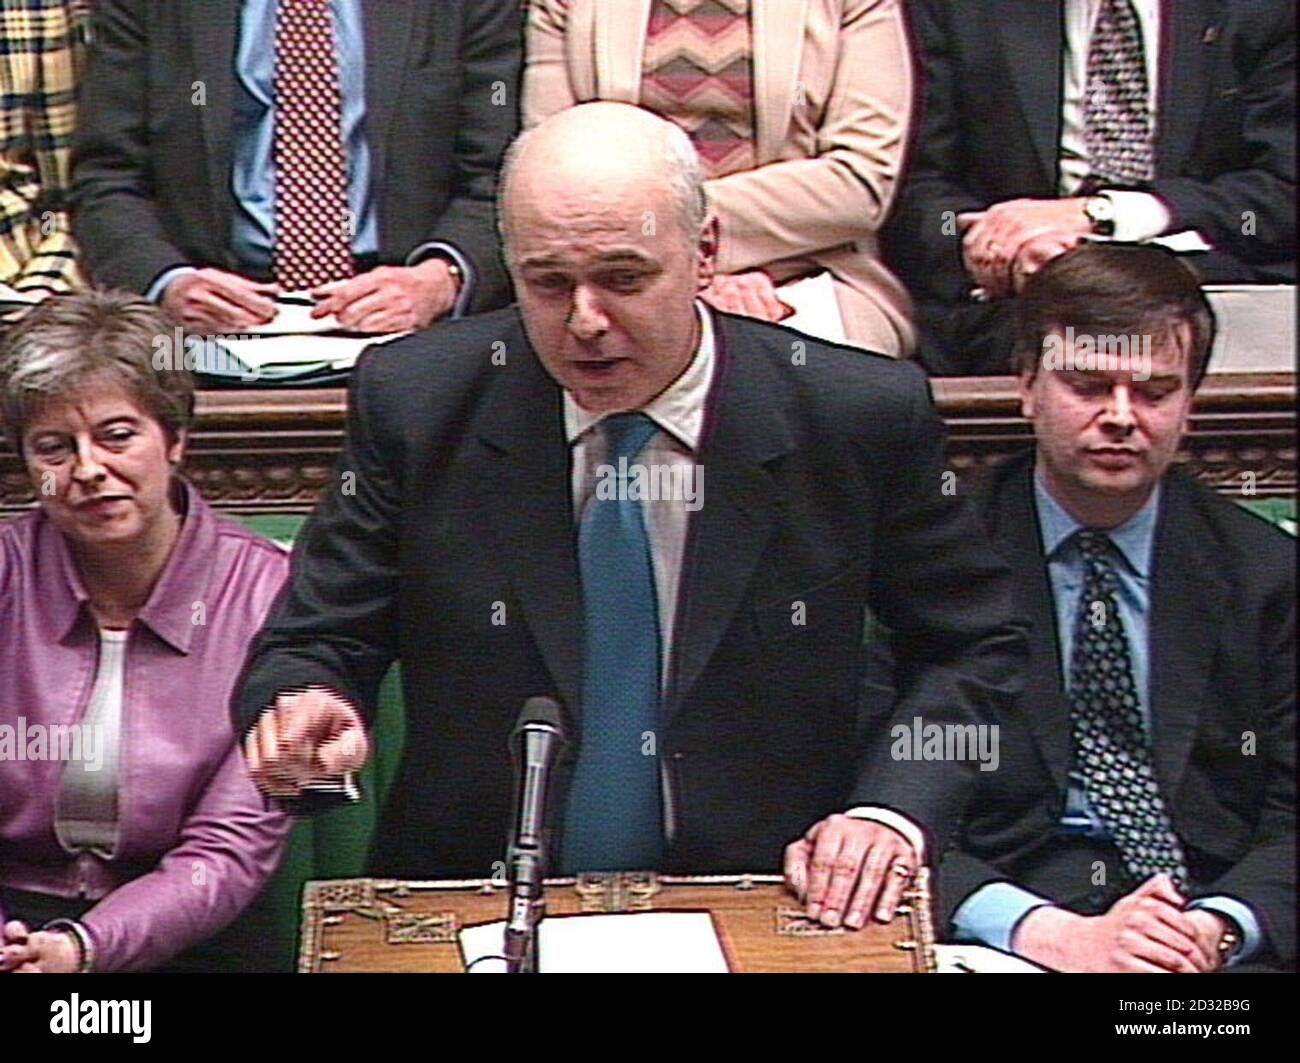 Conservative leader Ian Duncan Smith ask a question of Minister Tony Blair in the House of Commons during the regular weekly Parliamentary Question Time for the PM.  It was the first since MPs returned from their Christmas break. Stock Photo